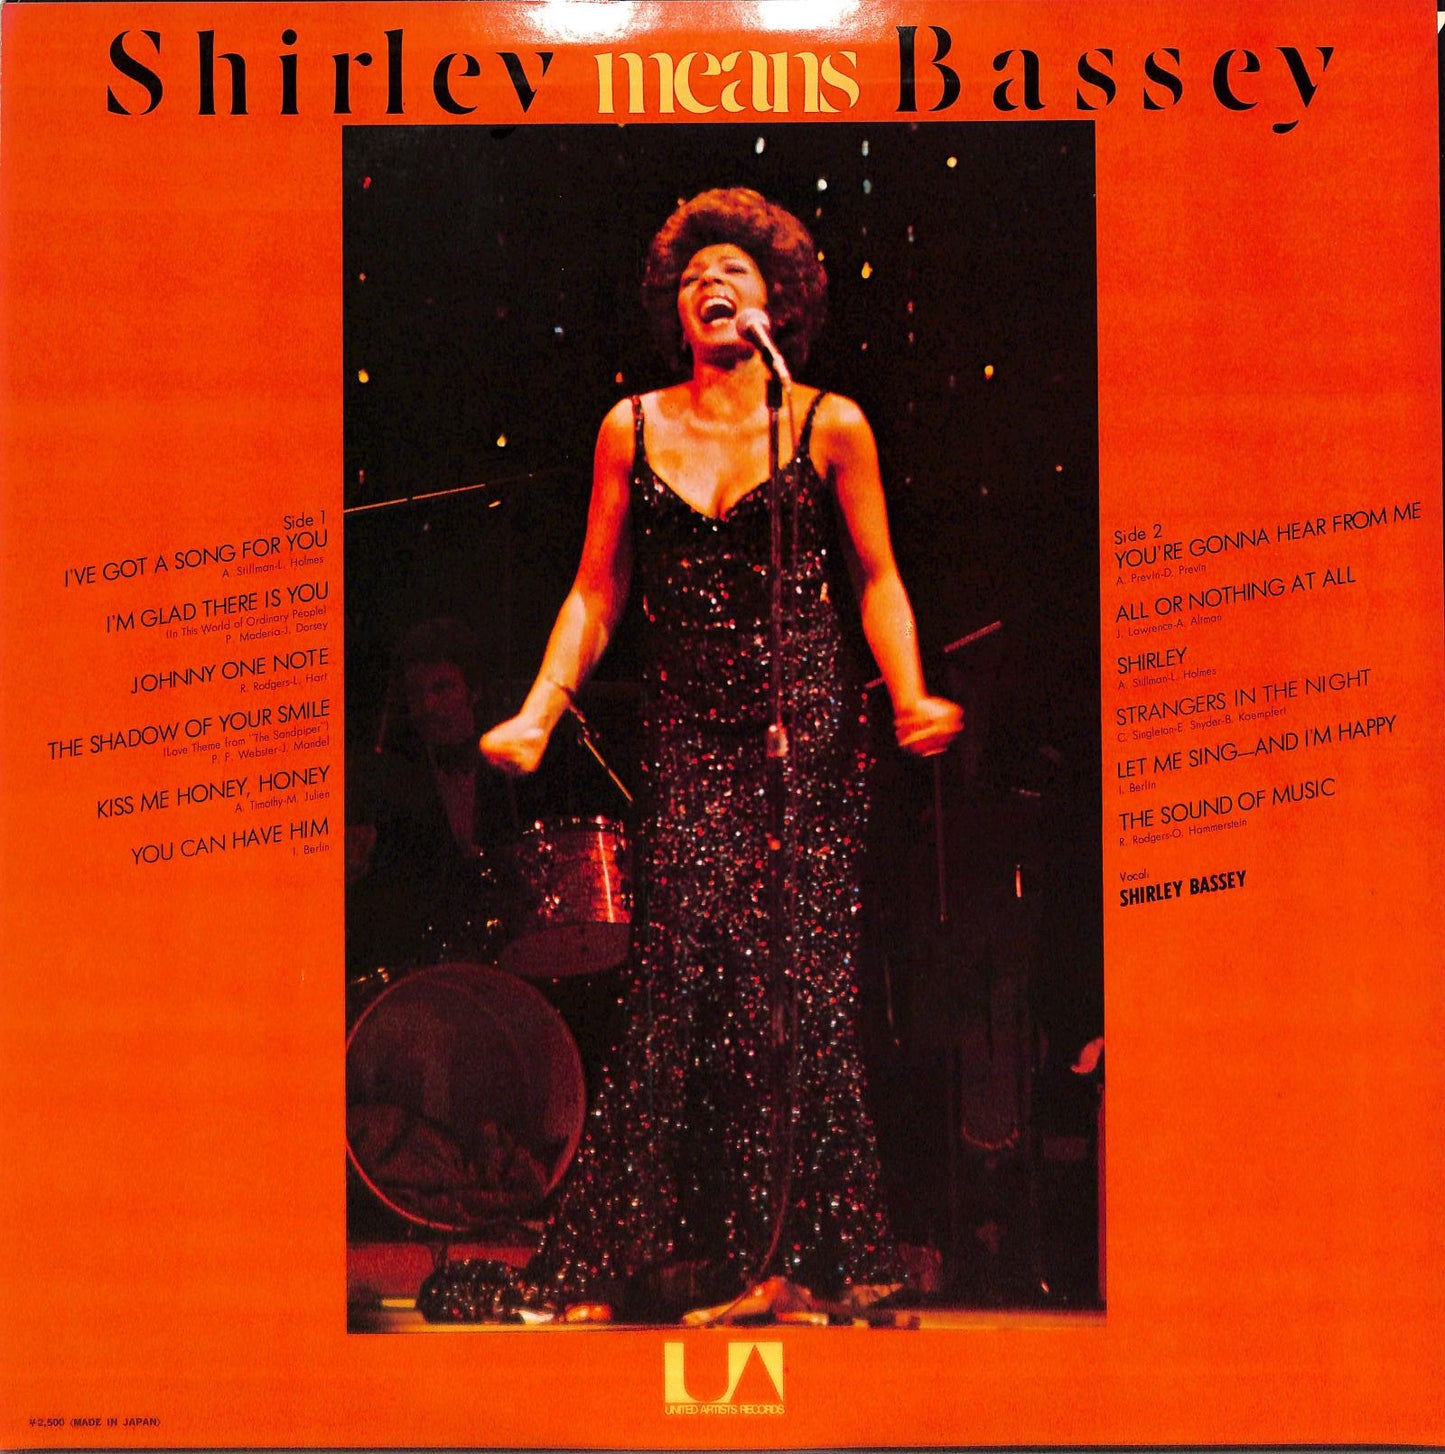 SHIRLEY BASSEY – Shirley Means Bassey